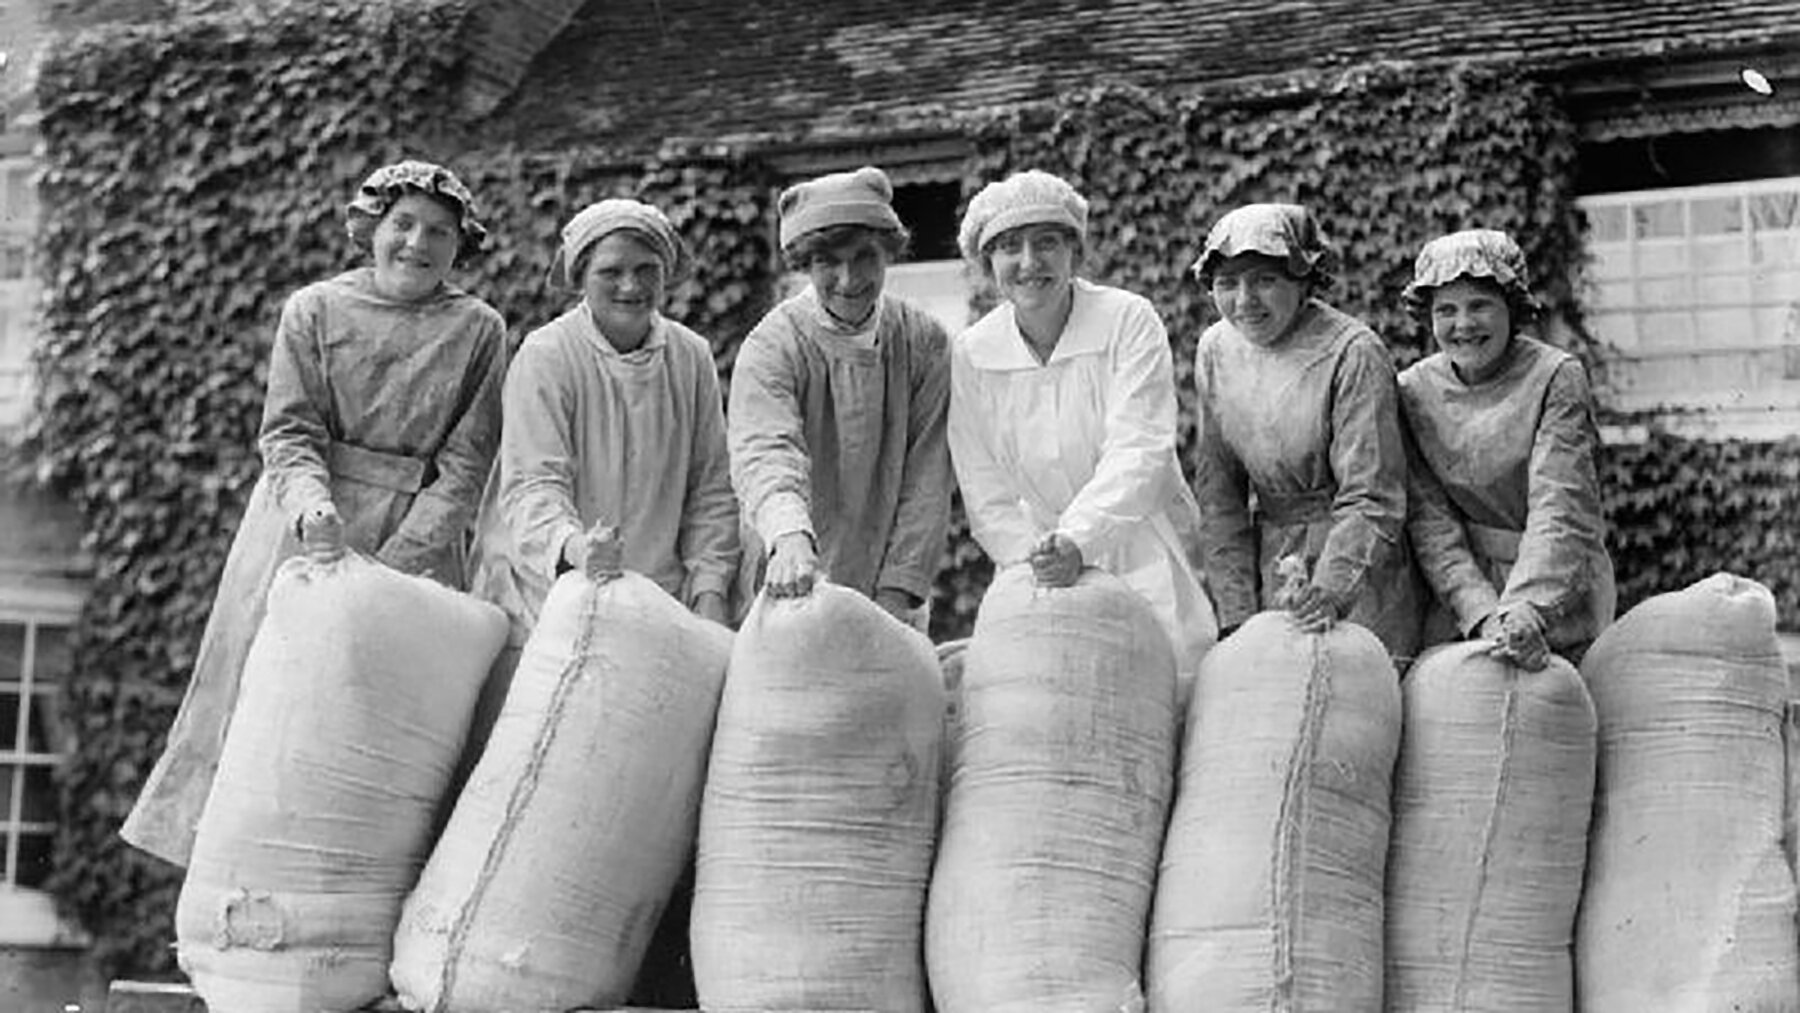 Women-workers-with-flour-sacks-at-British-mill-during-the-First-World-War-Wikimedia-1.jpg